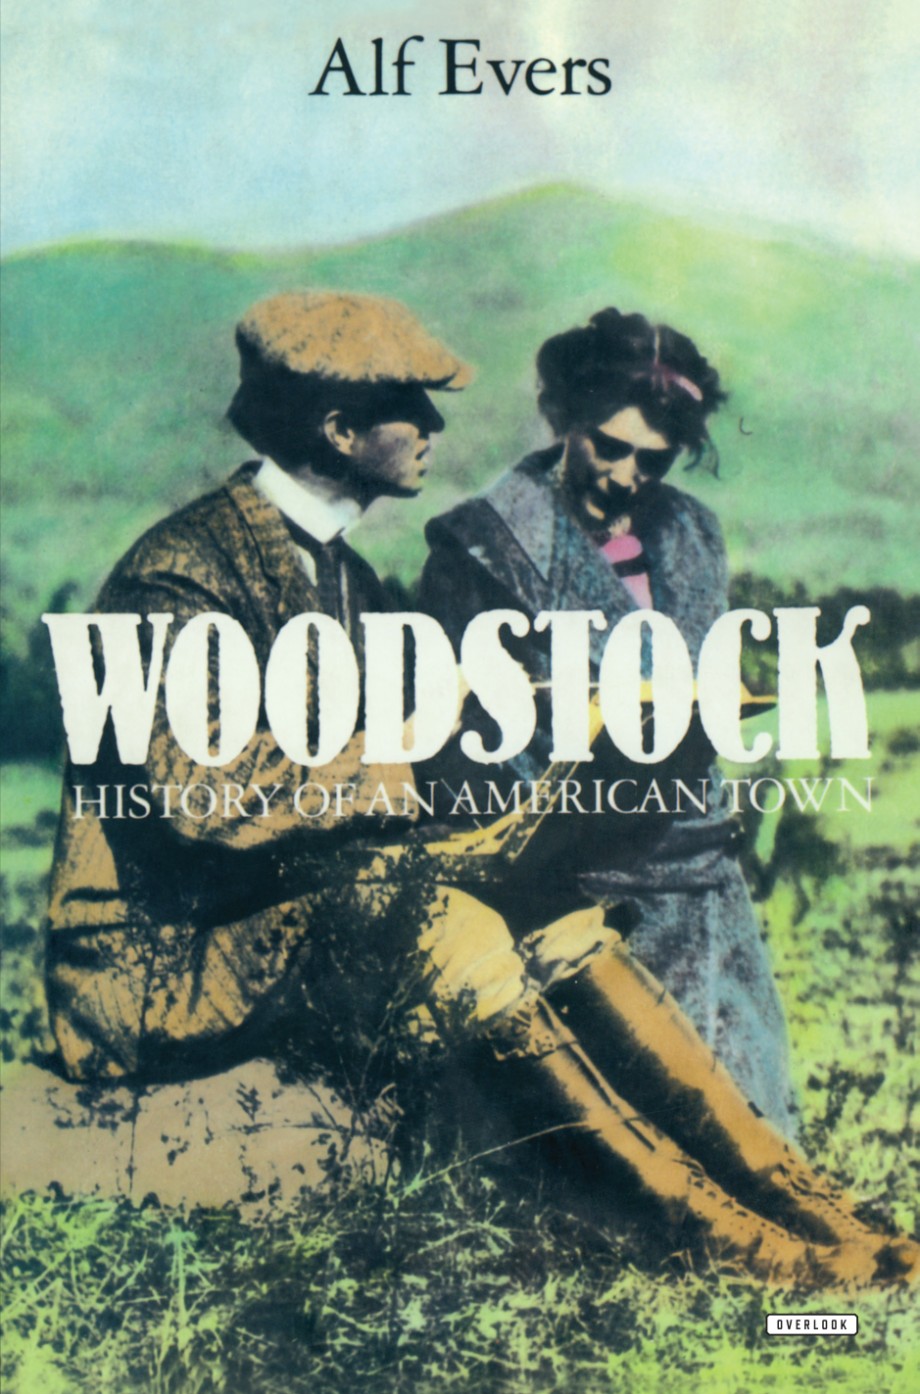 Woodstock History of an American Town